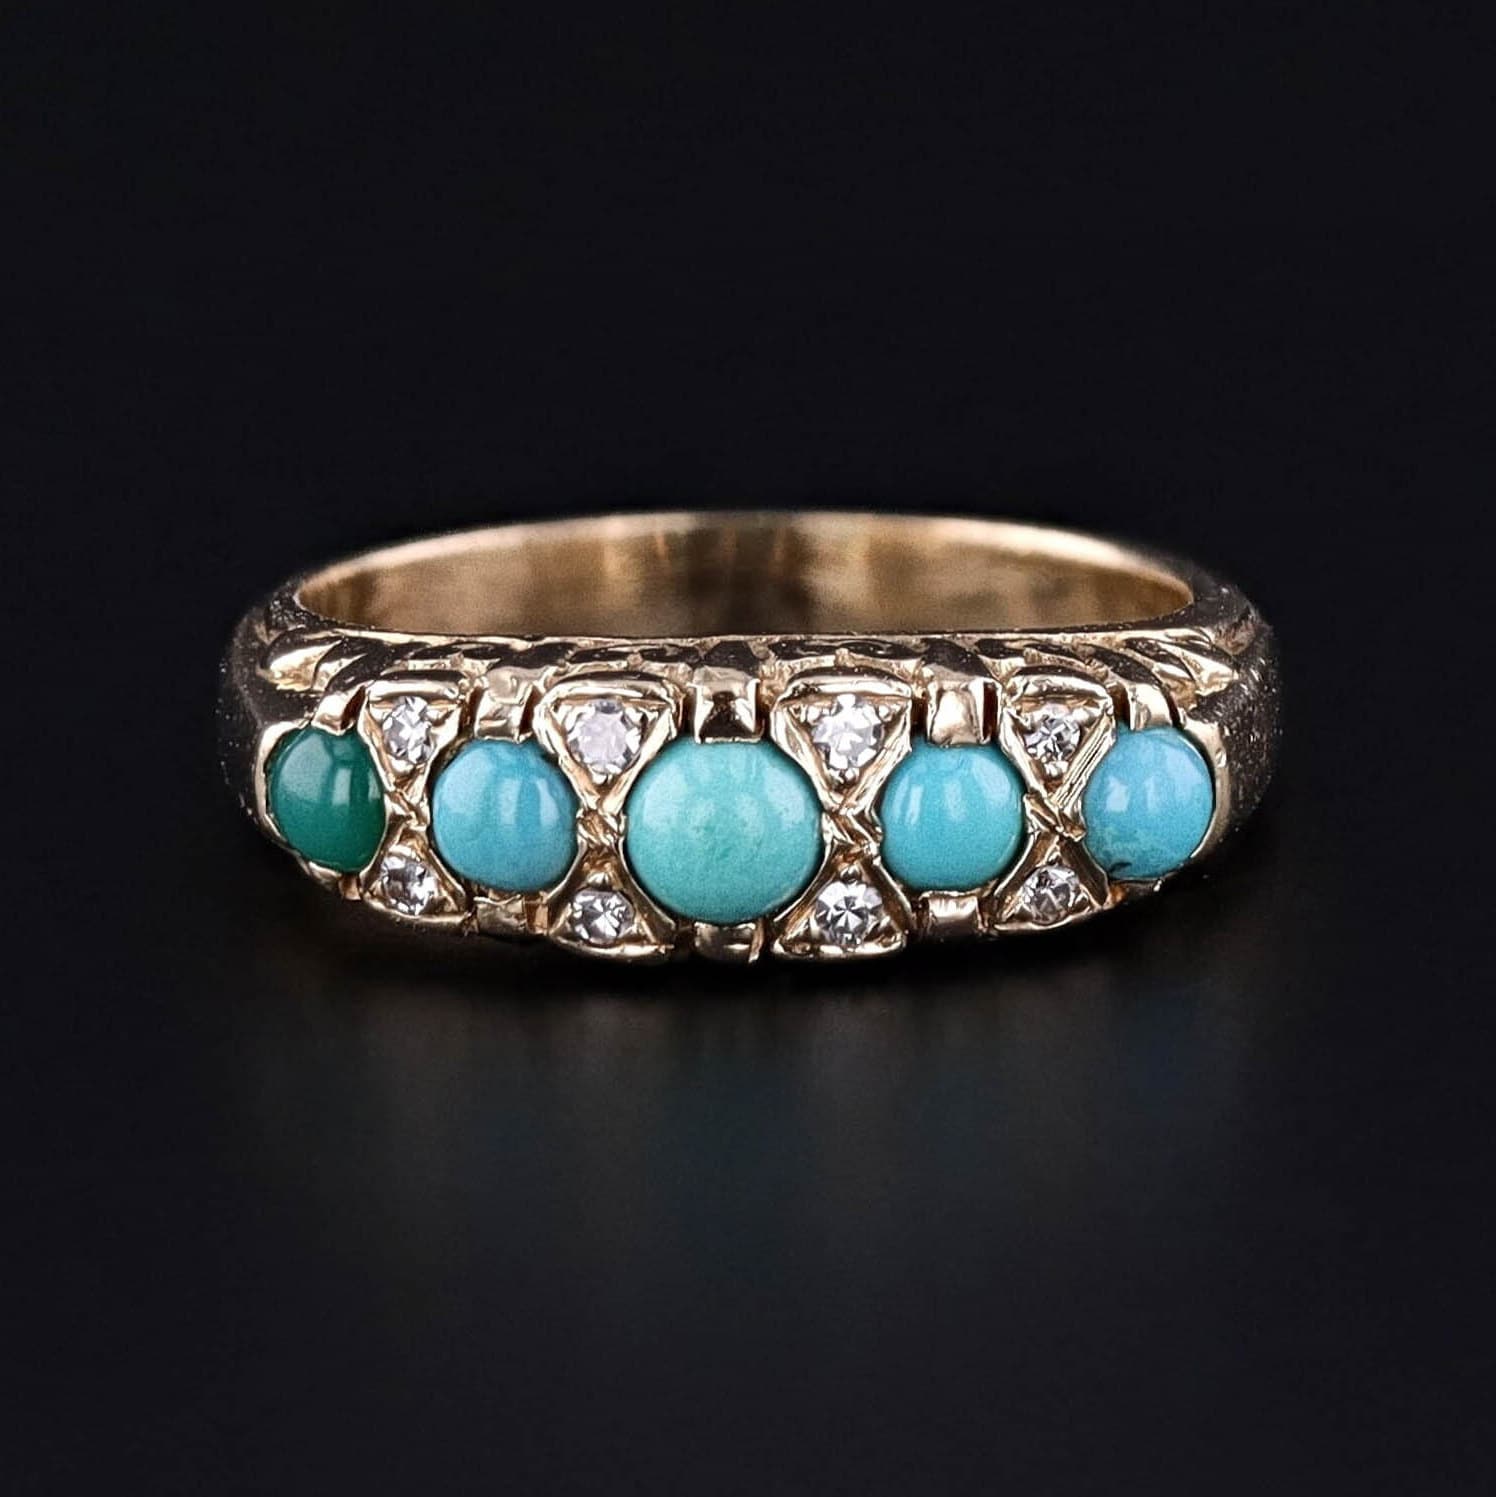 Vintage Turquoise and Diamond Ring of 14k Gold